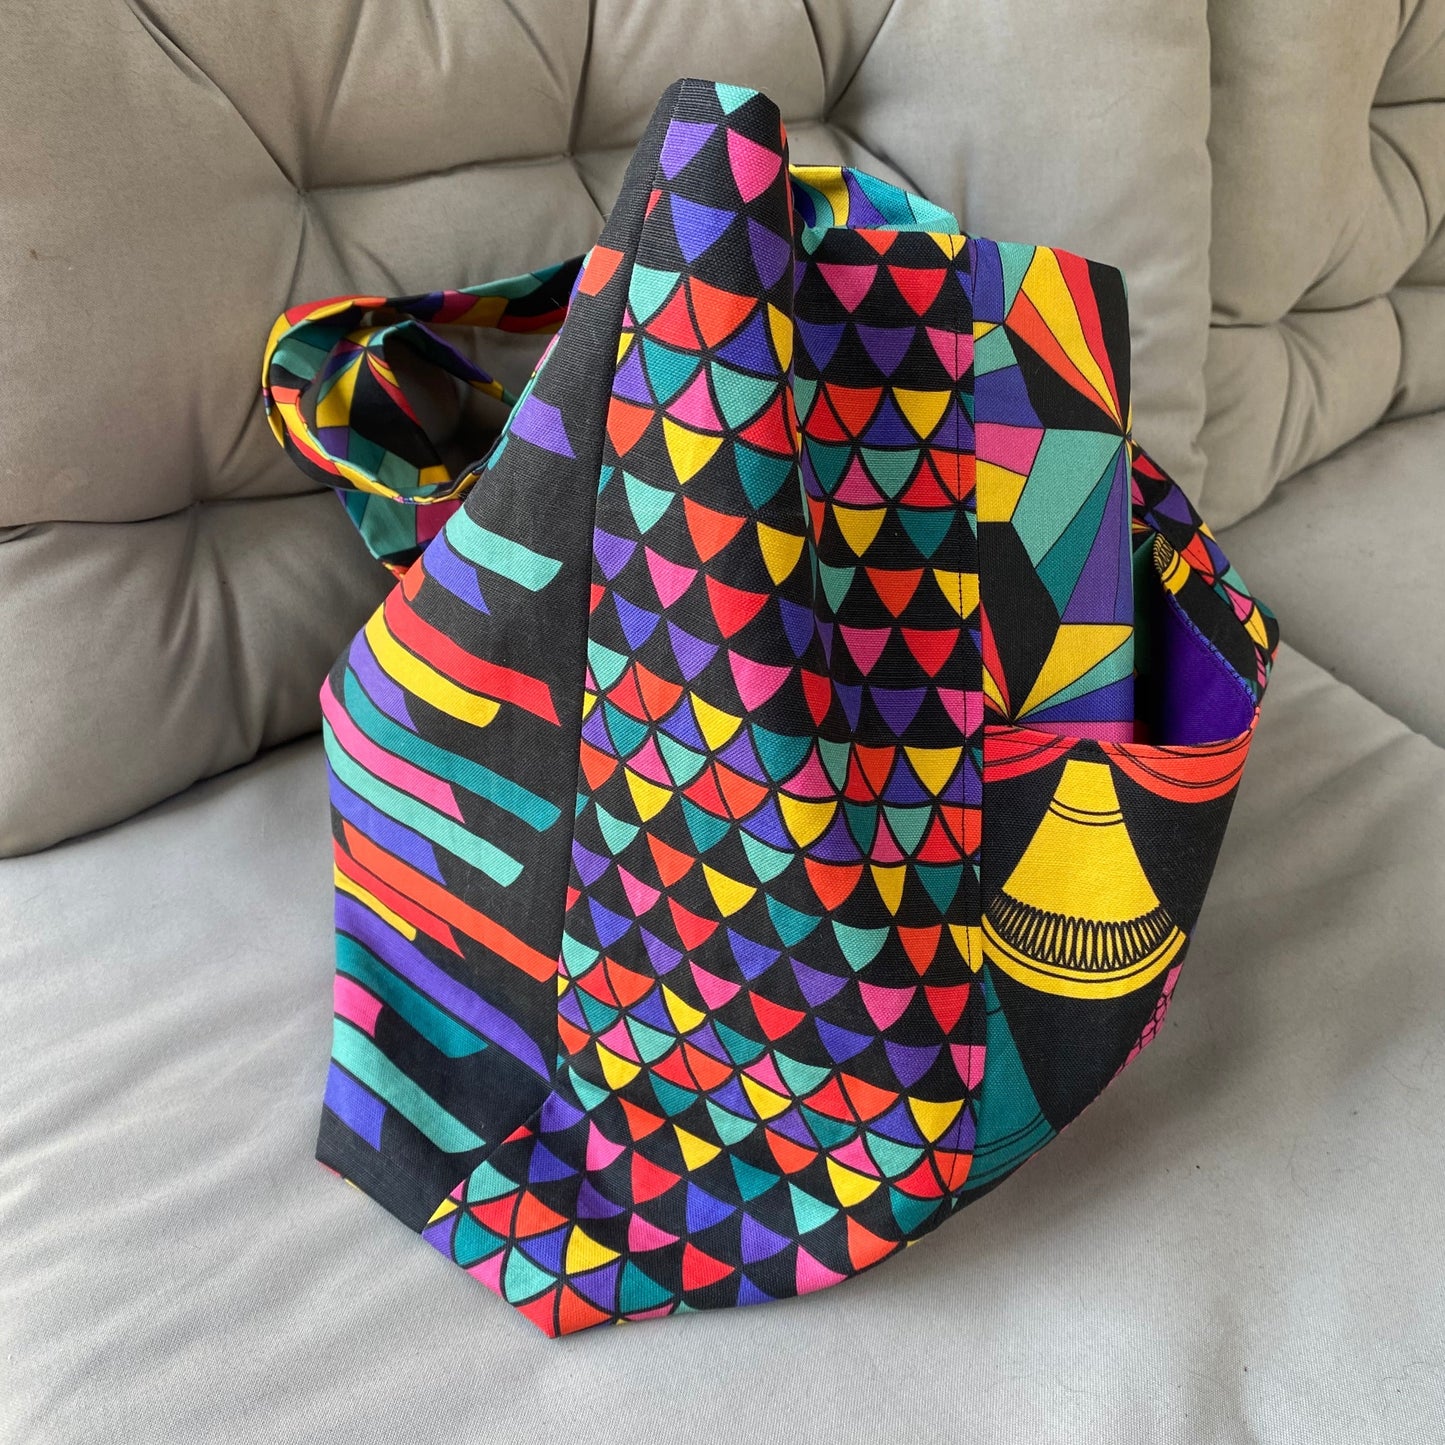 Beginner Sewing Class: Tote Bag (3 hours)